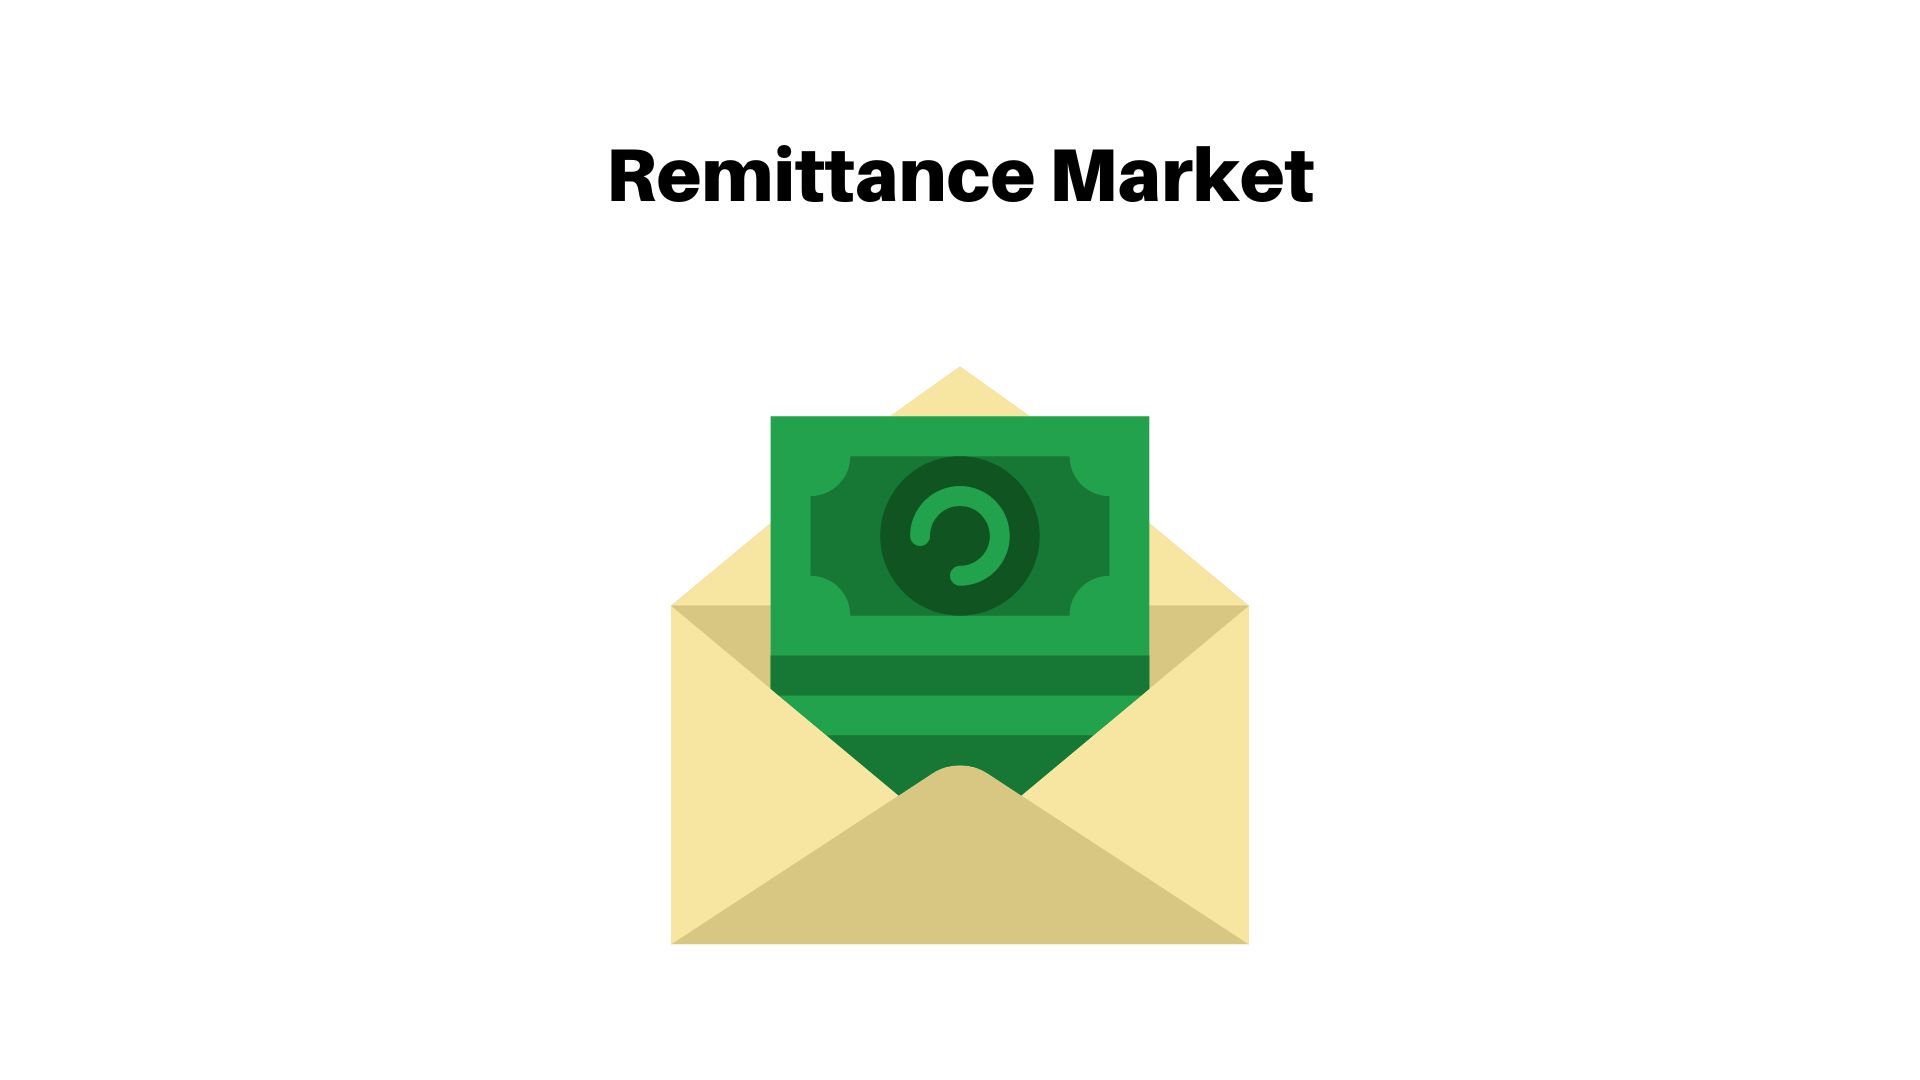 Remittance Market Revenue Set to Grow at a CAGR of 17.8% from 2023 to 2033